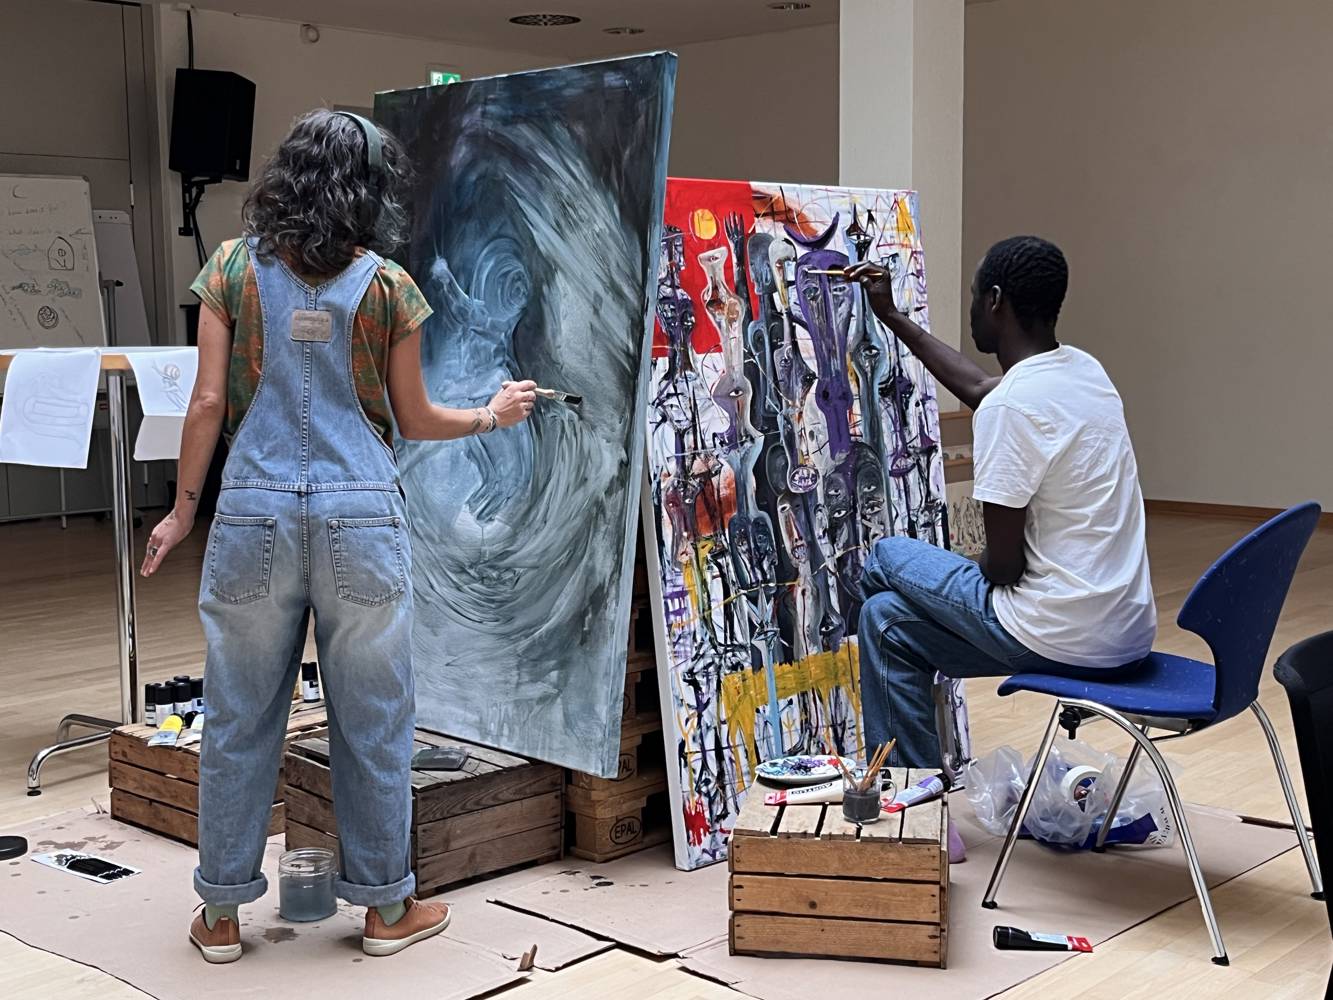 Diala Brisly and Khalid Shatta painting during Rotterdam Residency. Photo: Cindy Horst